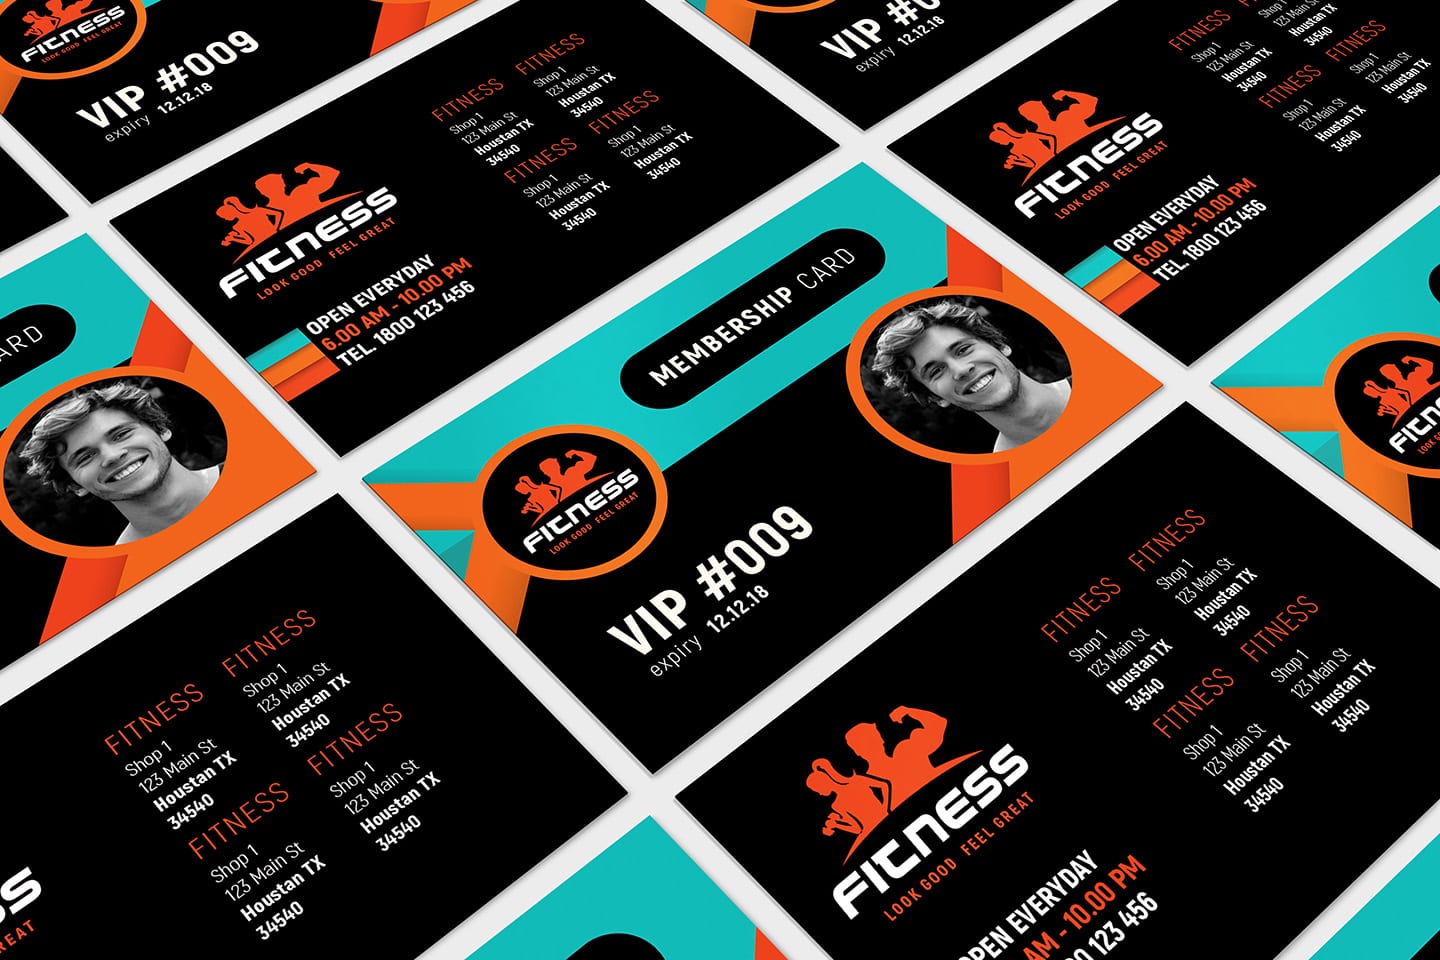 Gym / Fitness Membership Card Template in PSD, Ai & Vector Regarding Gym Membership Card Template